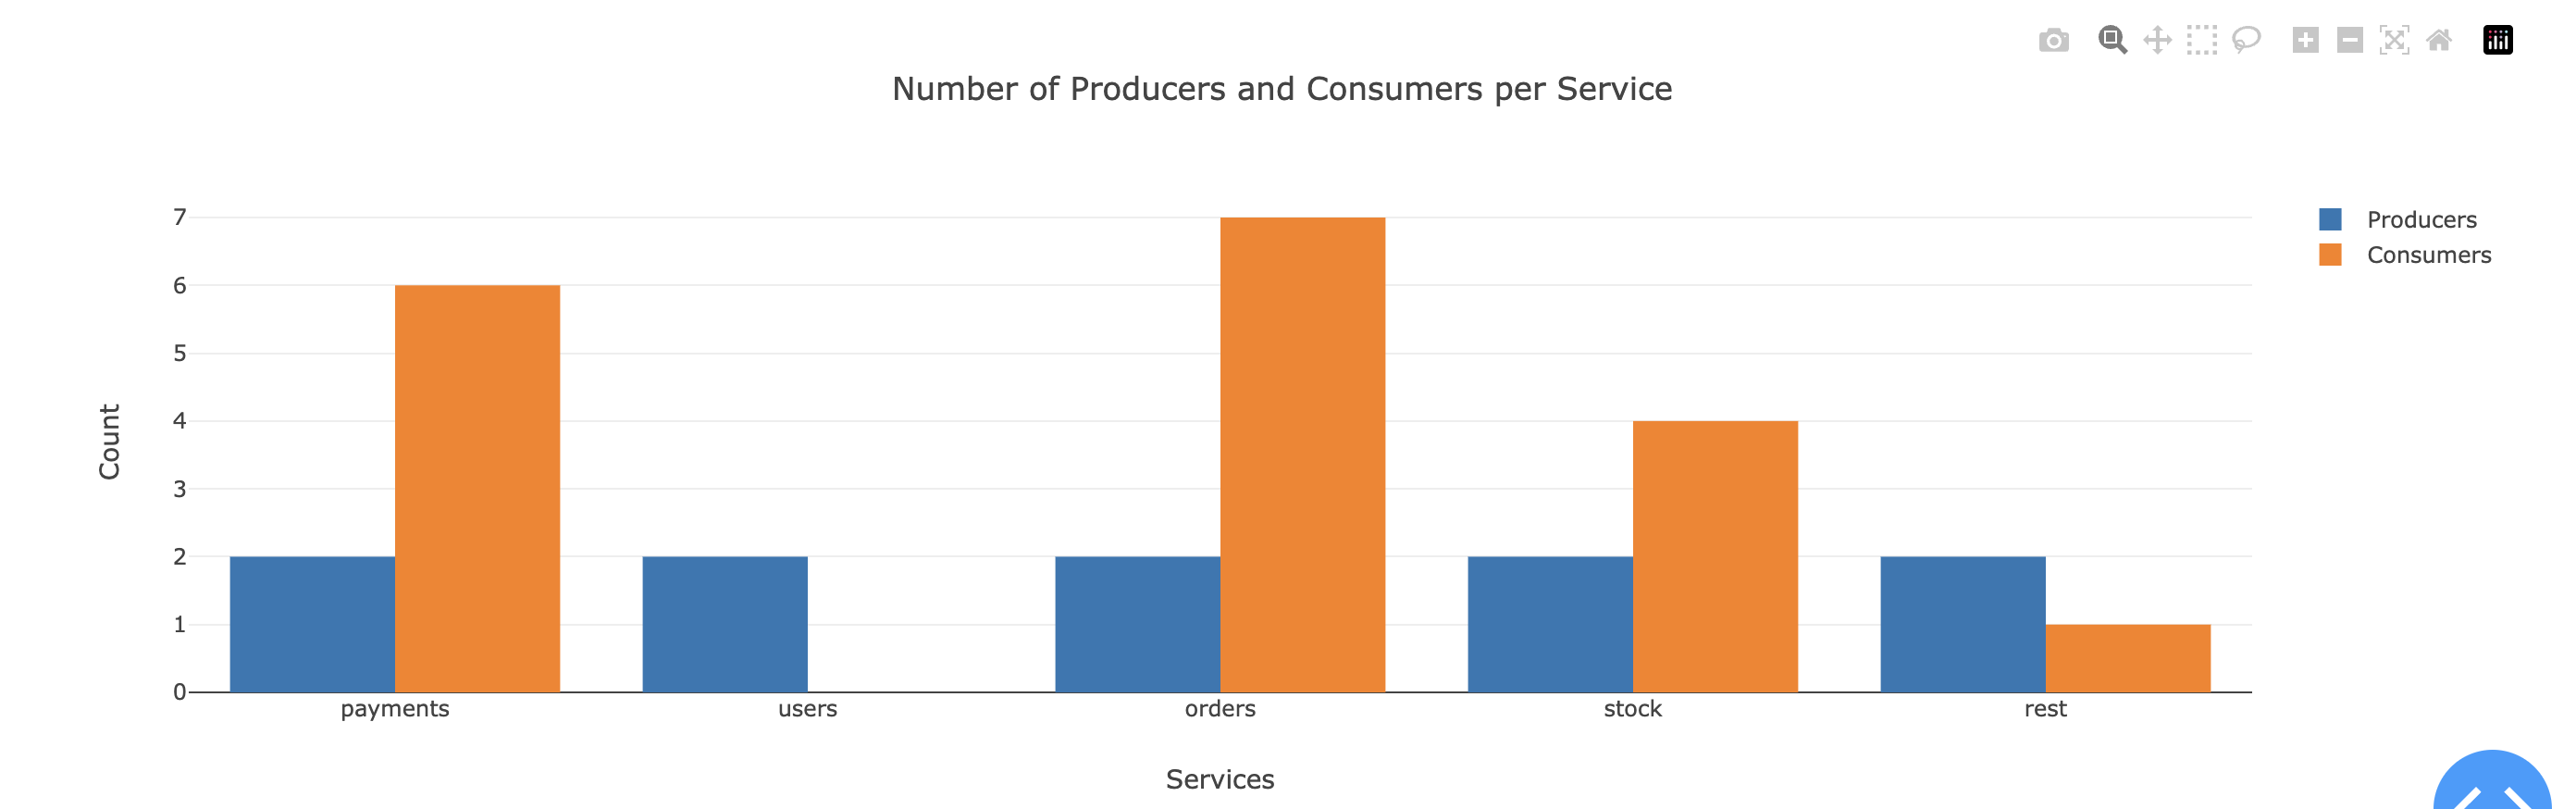 Number_of_prod_cons_per_services